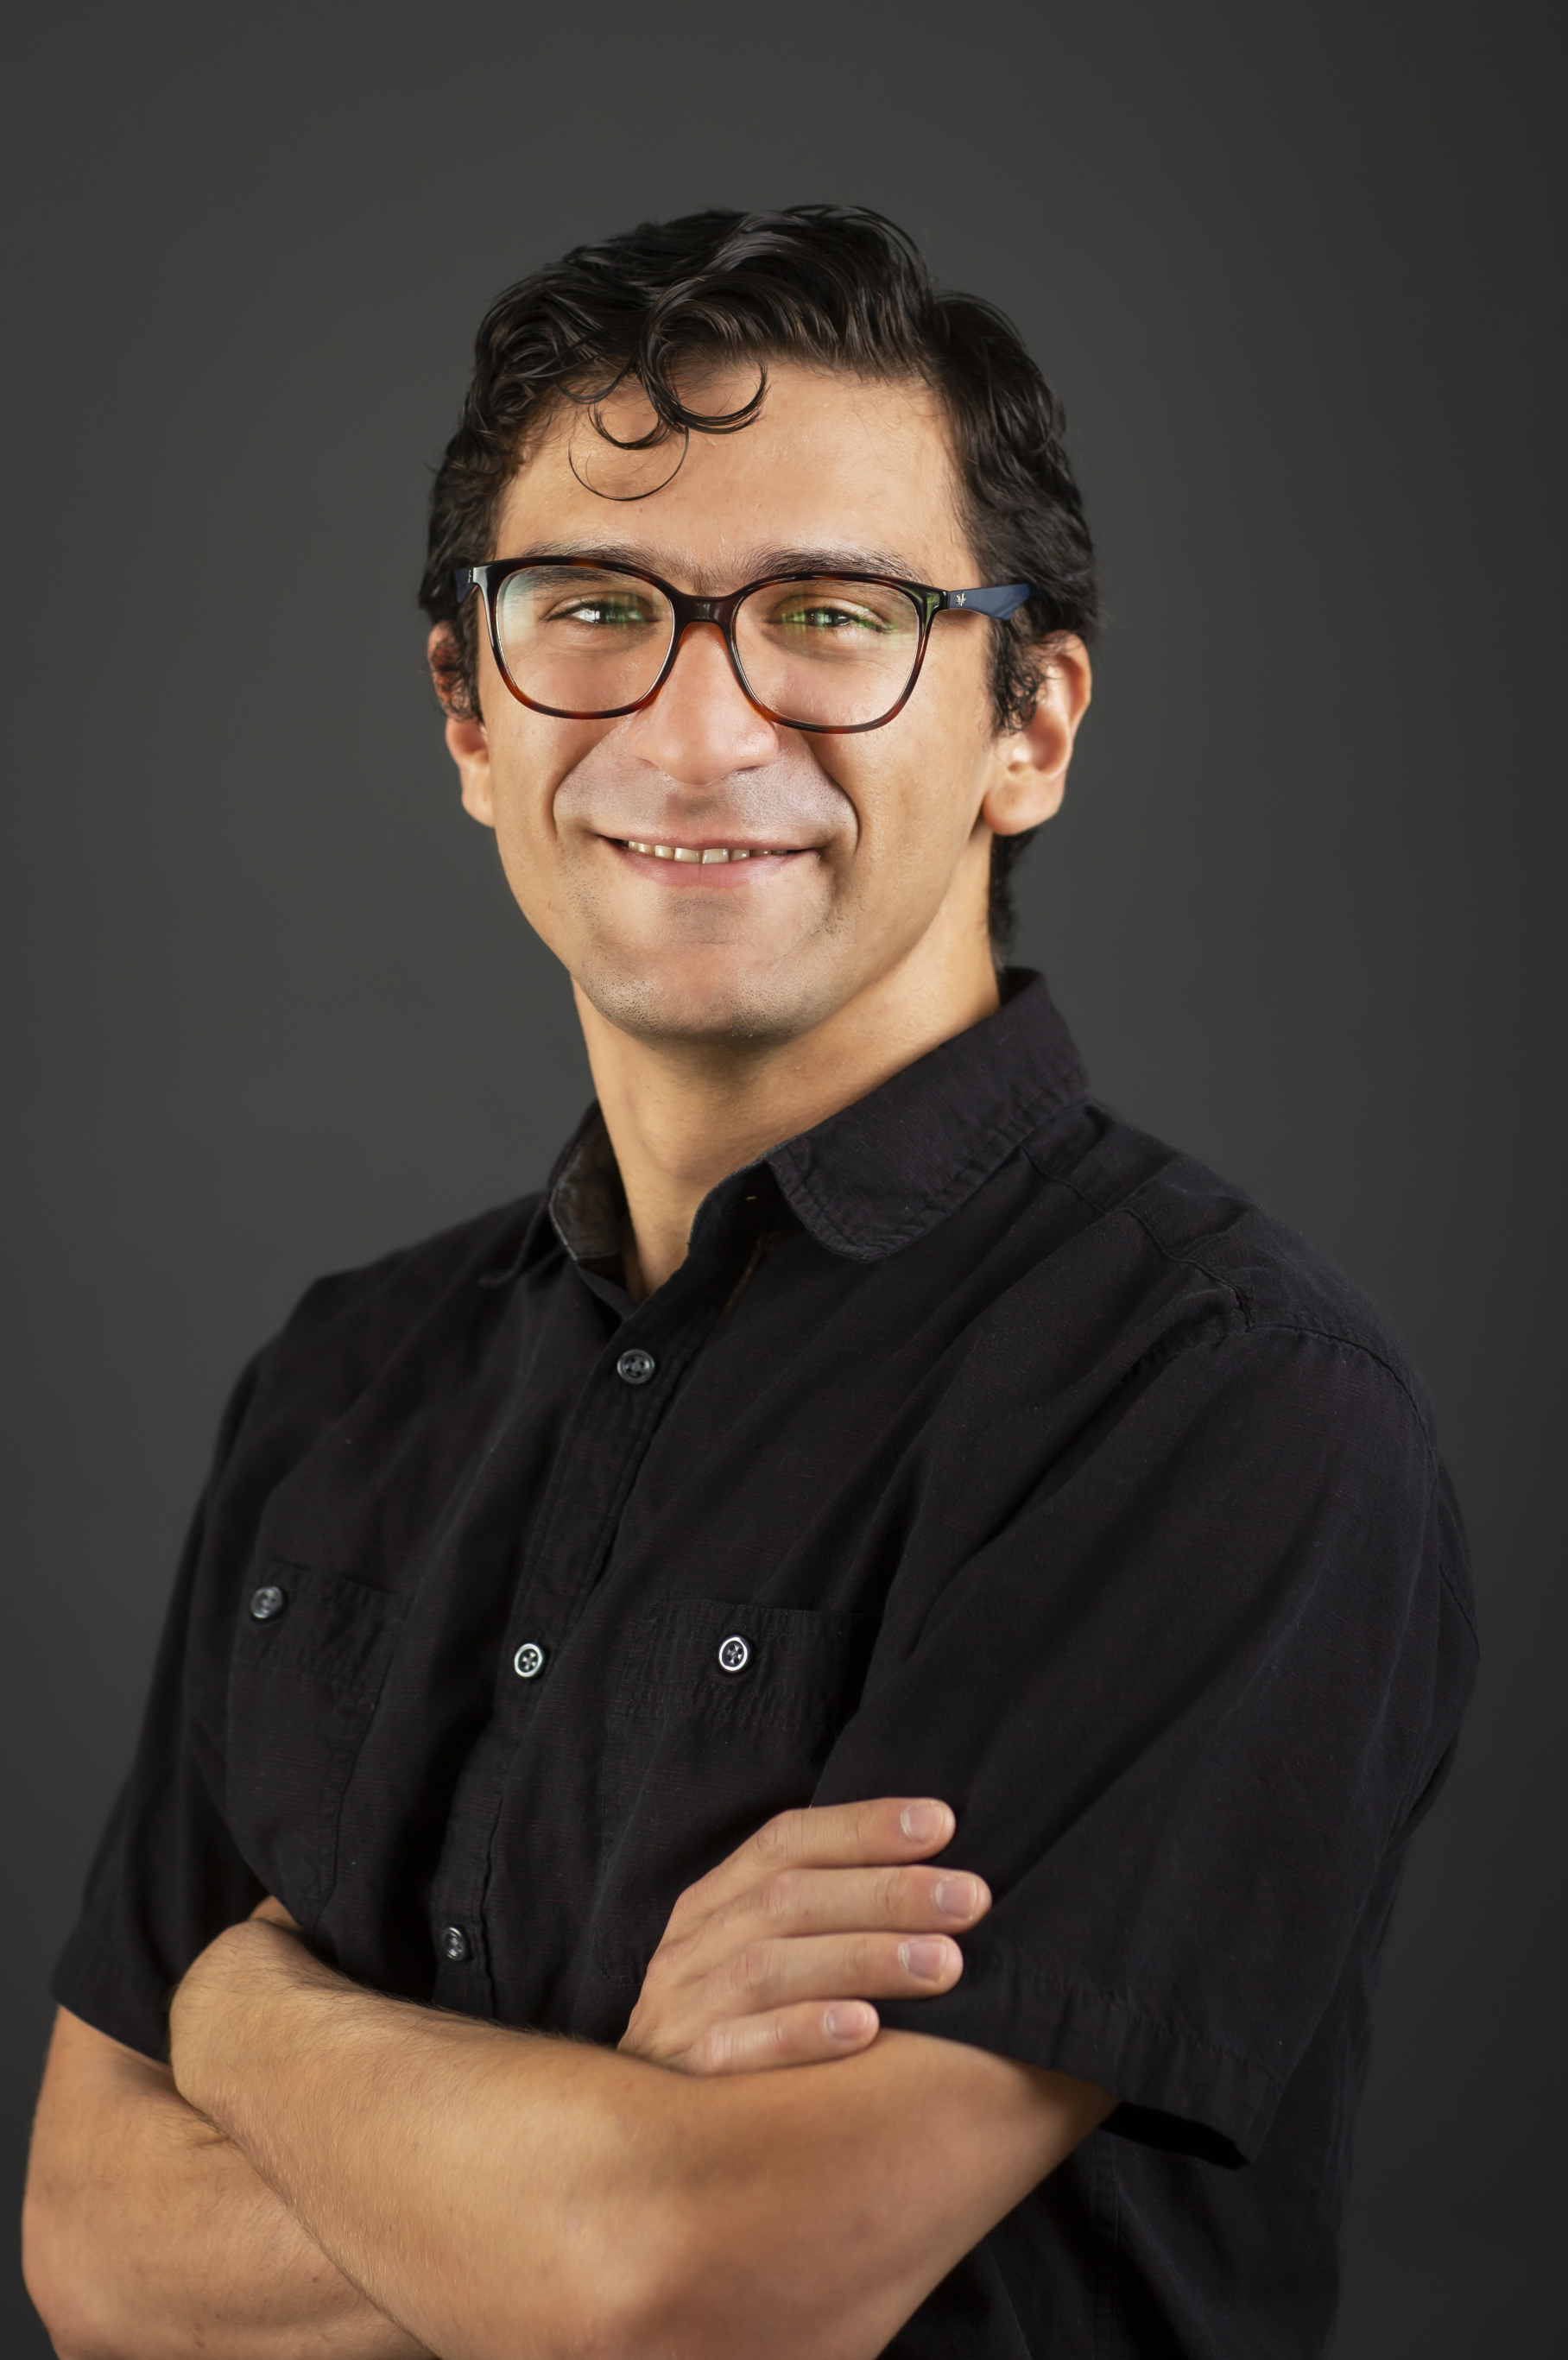 wavy dark-haired man with glasses in black short-sleeved dress shirt in formal headshot